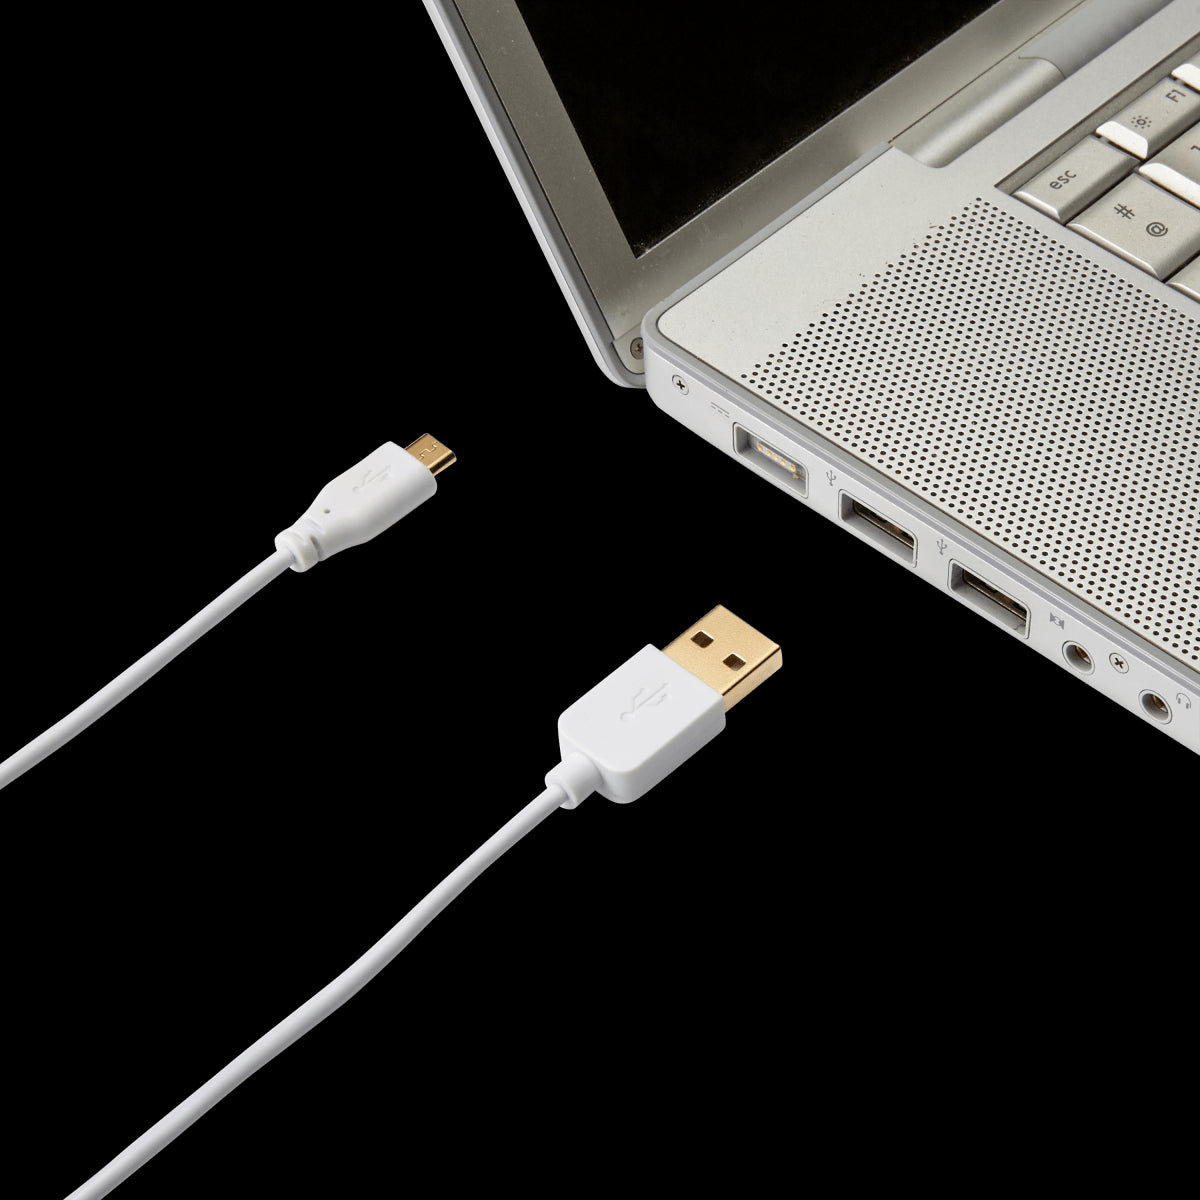 1 M USB 2.0 TYPE A/MICRO USB CABLE